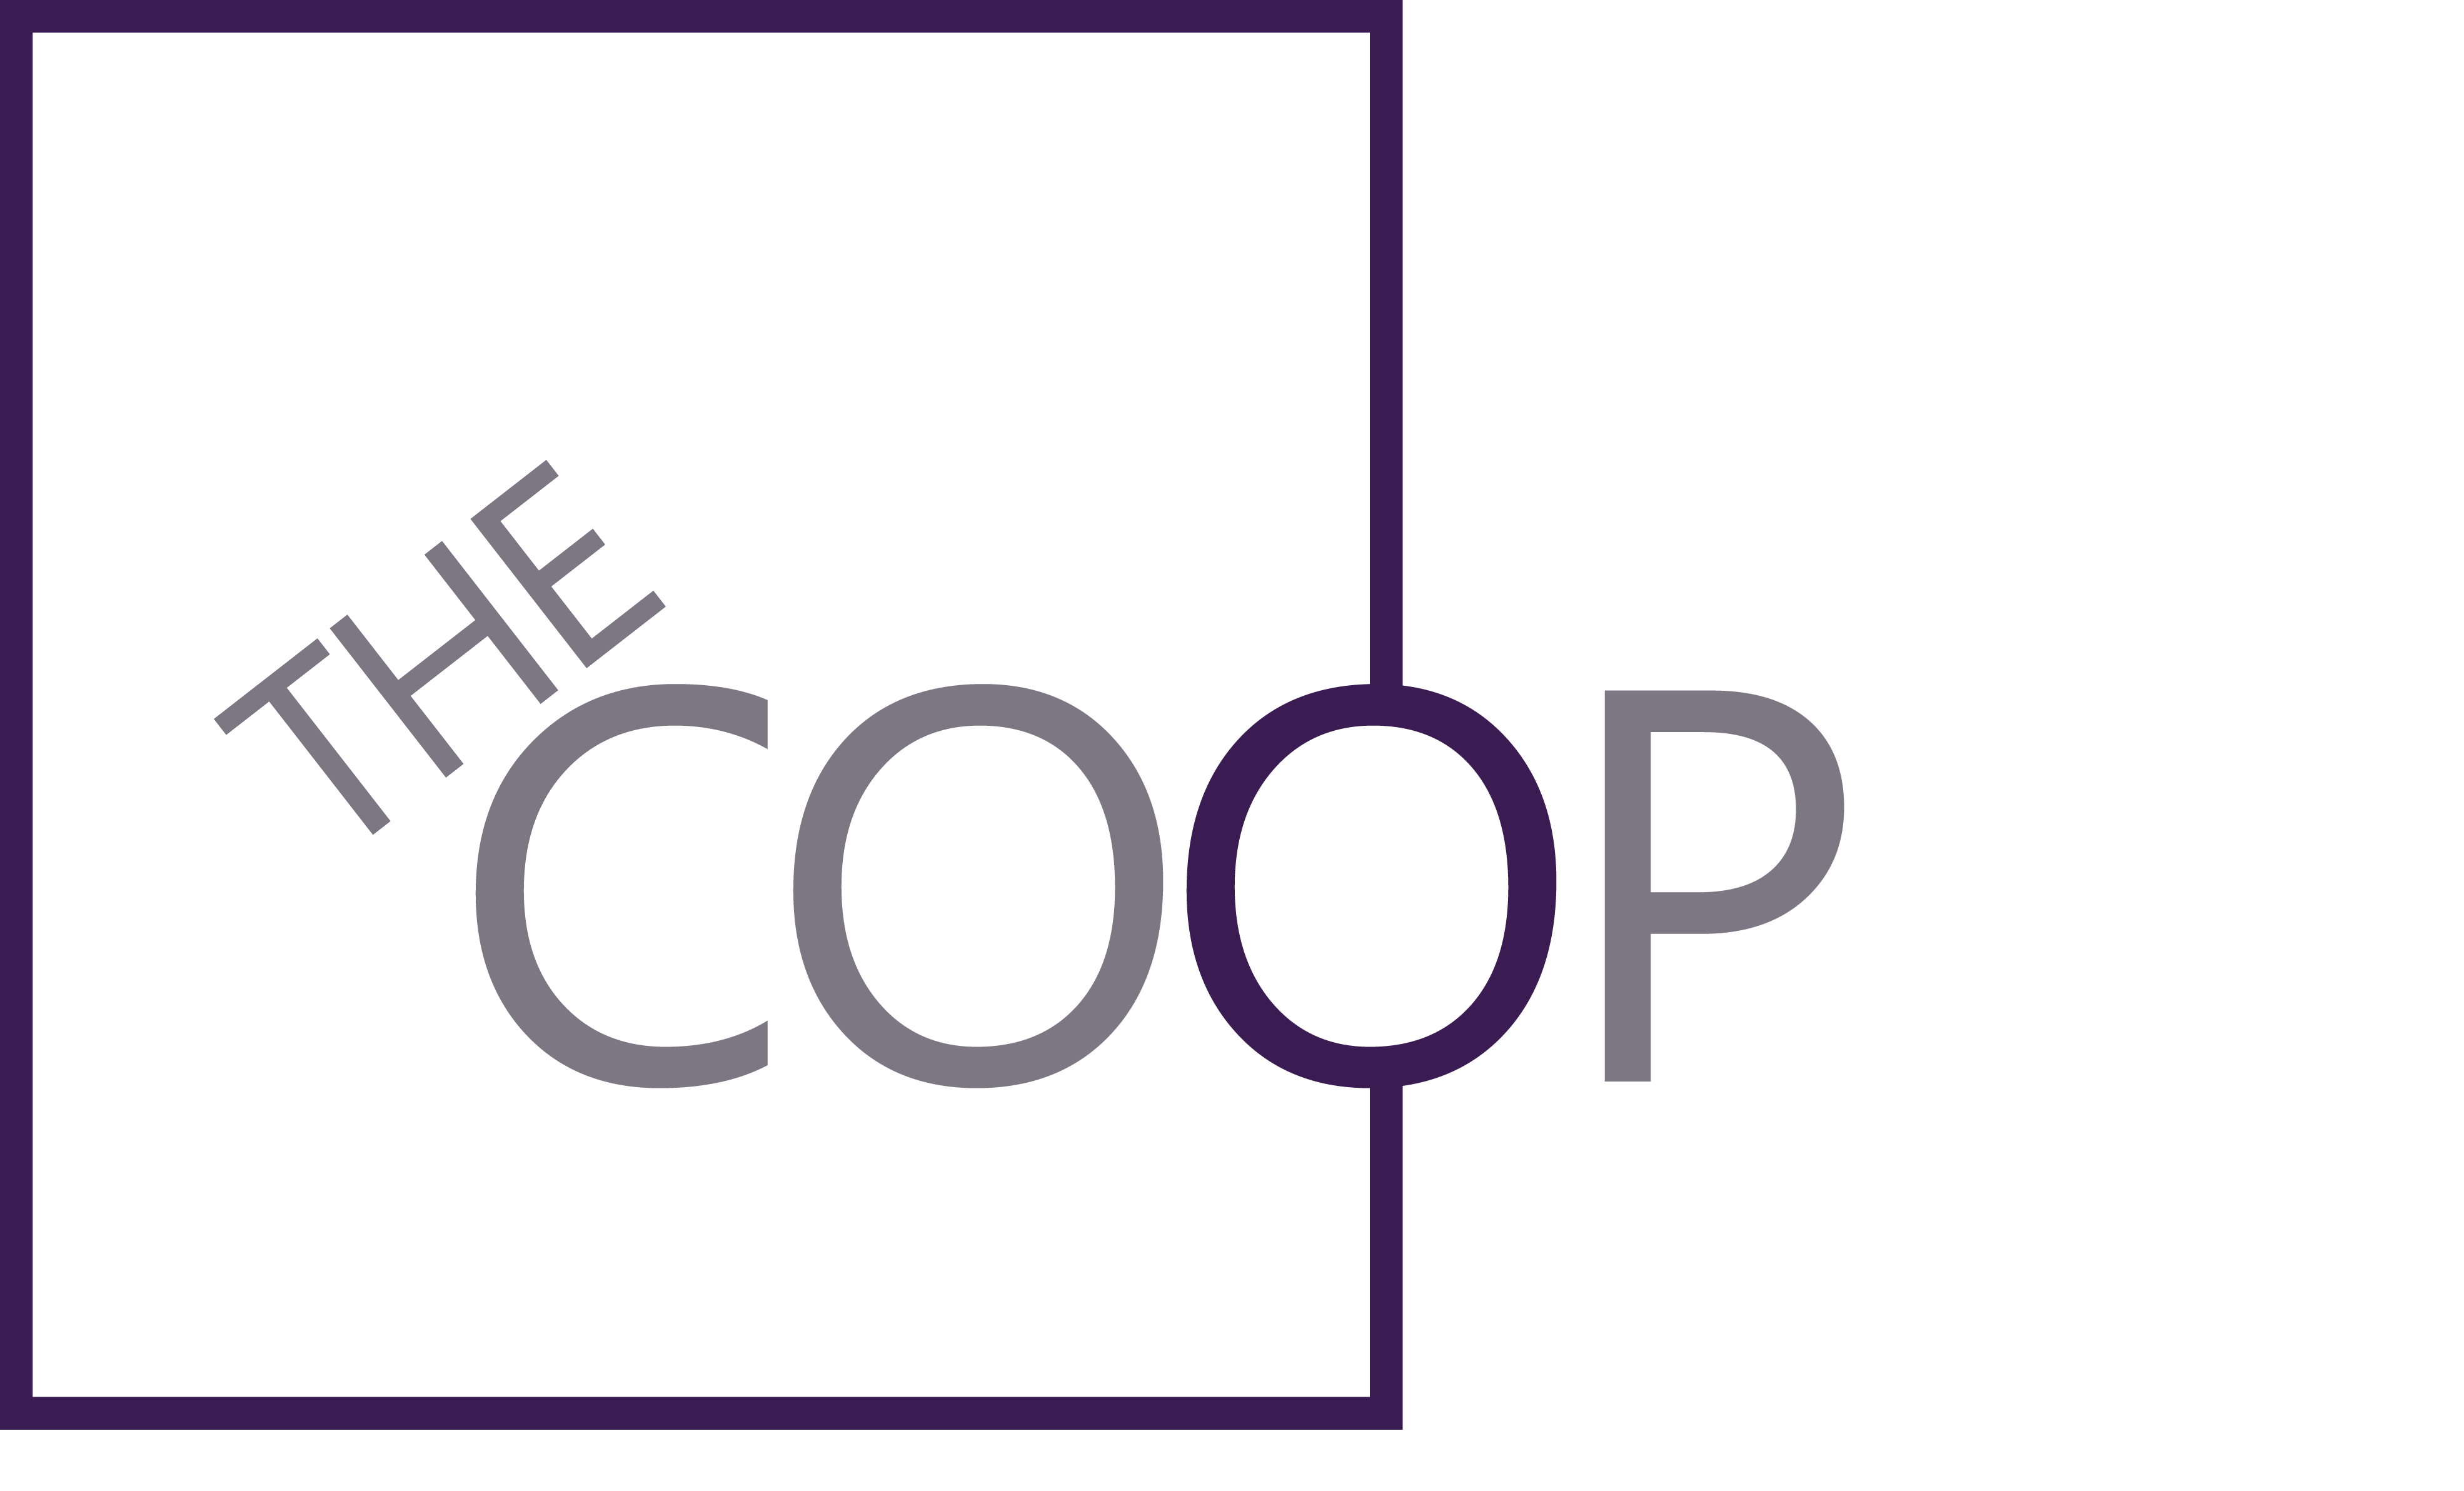 The coop why summerlin. Las vegas clipart small